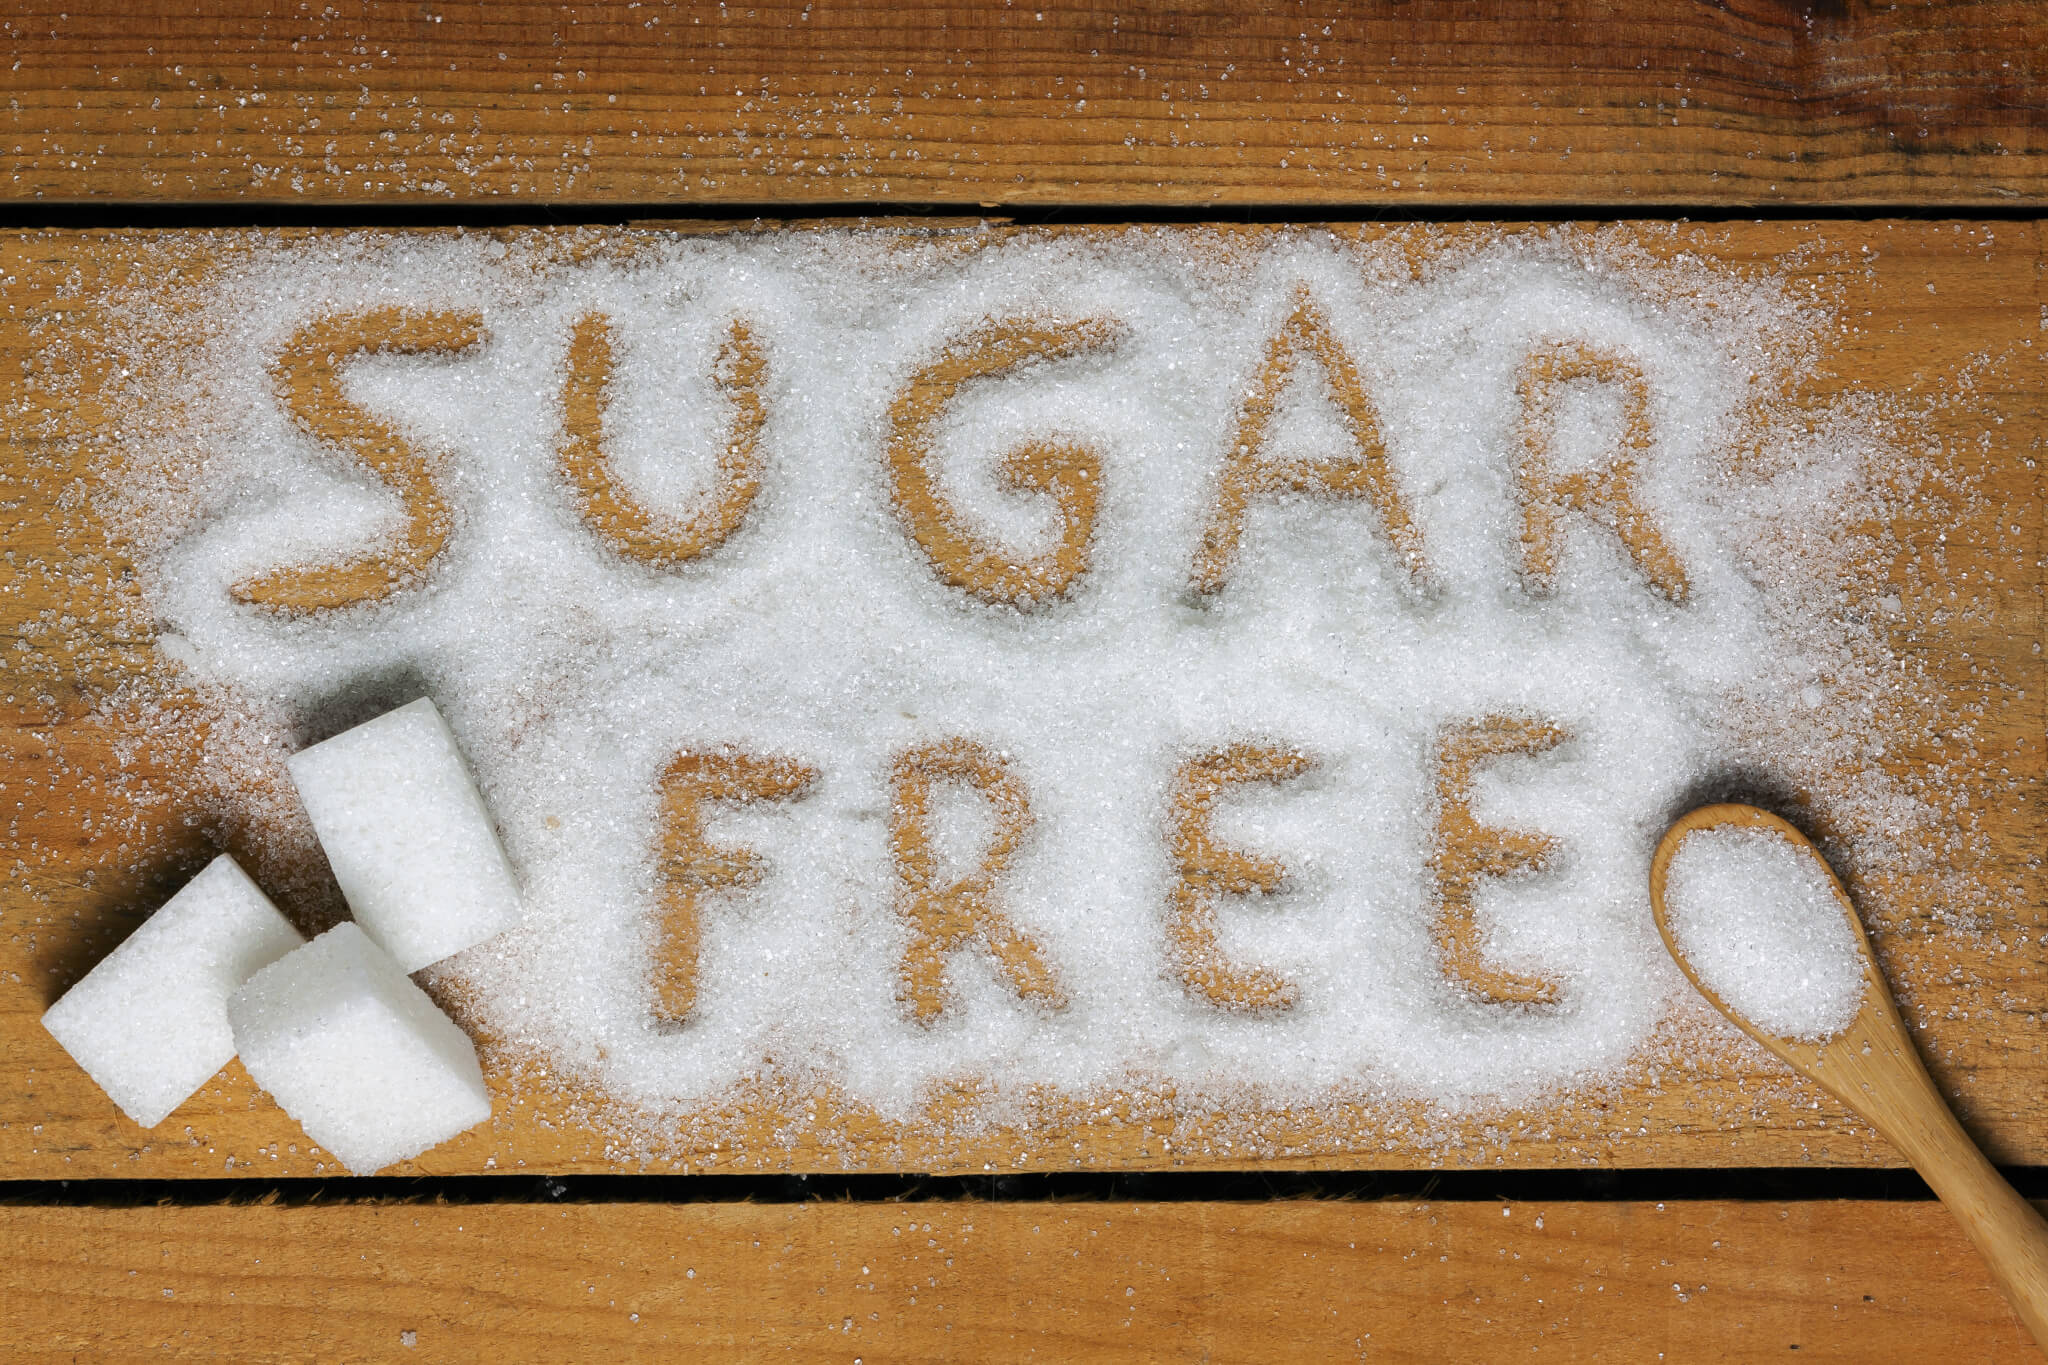 8 Ways Artificial Sweeteners Are Bad For You: Why ‘Sugar-Free’ Isn’t Always Healthier